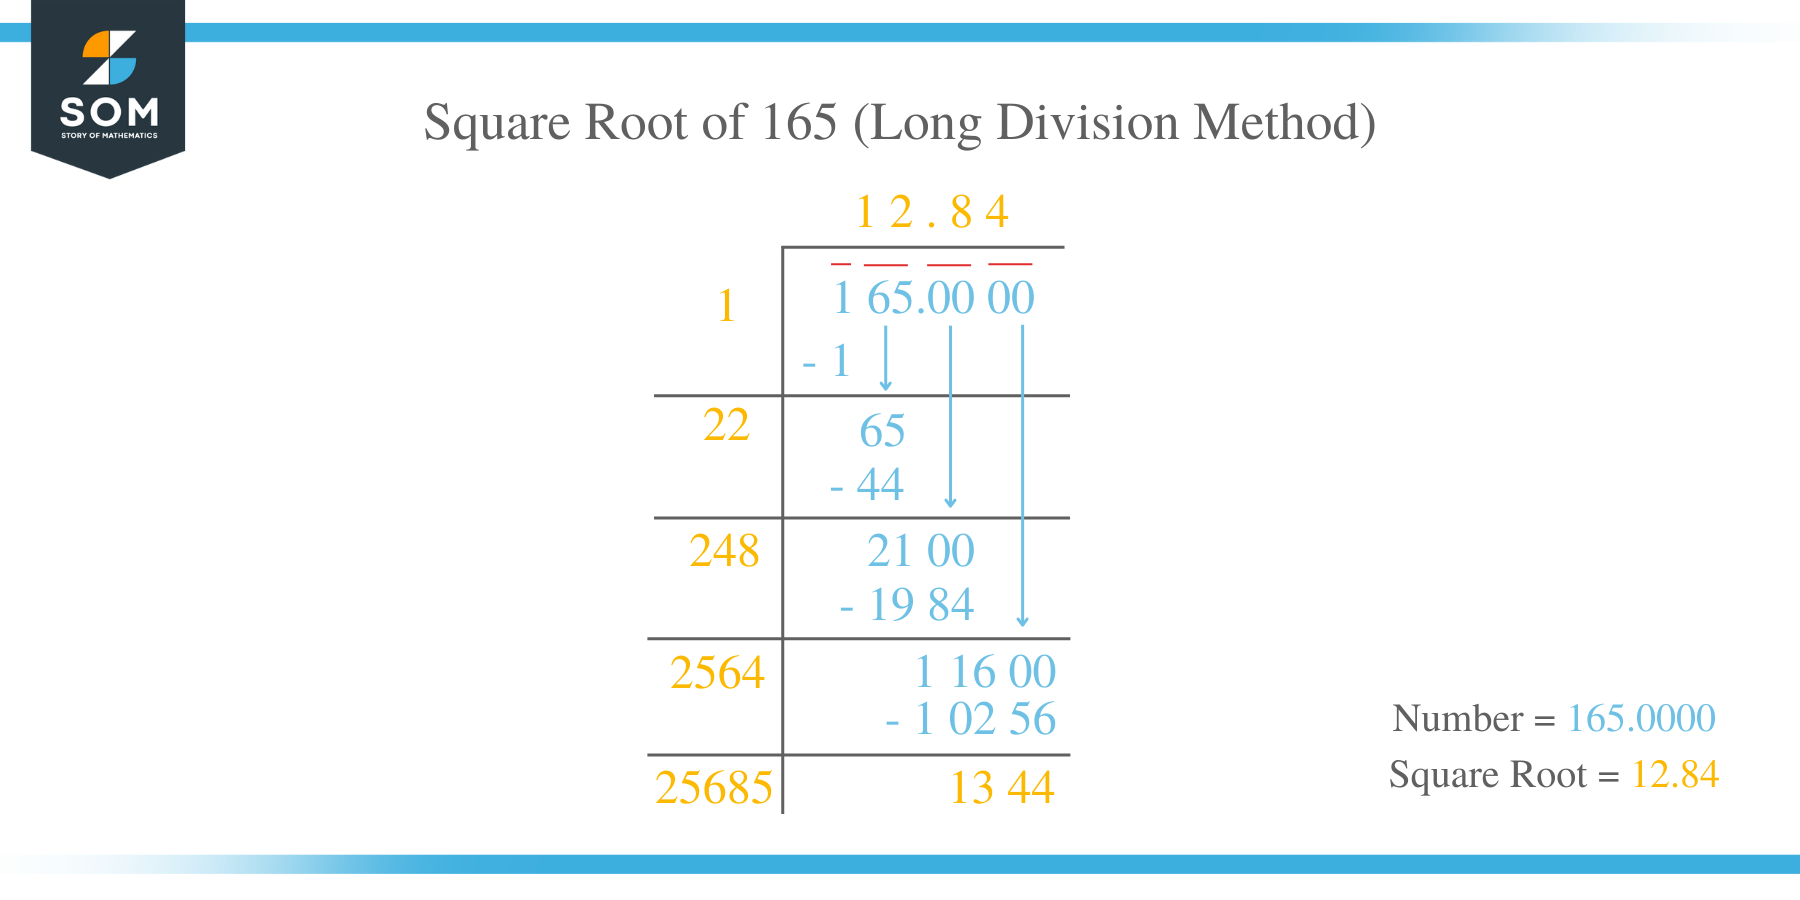 Square Root of 165 by Long Division Method